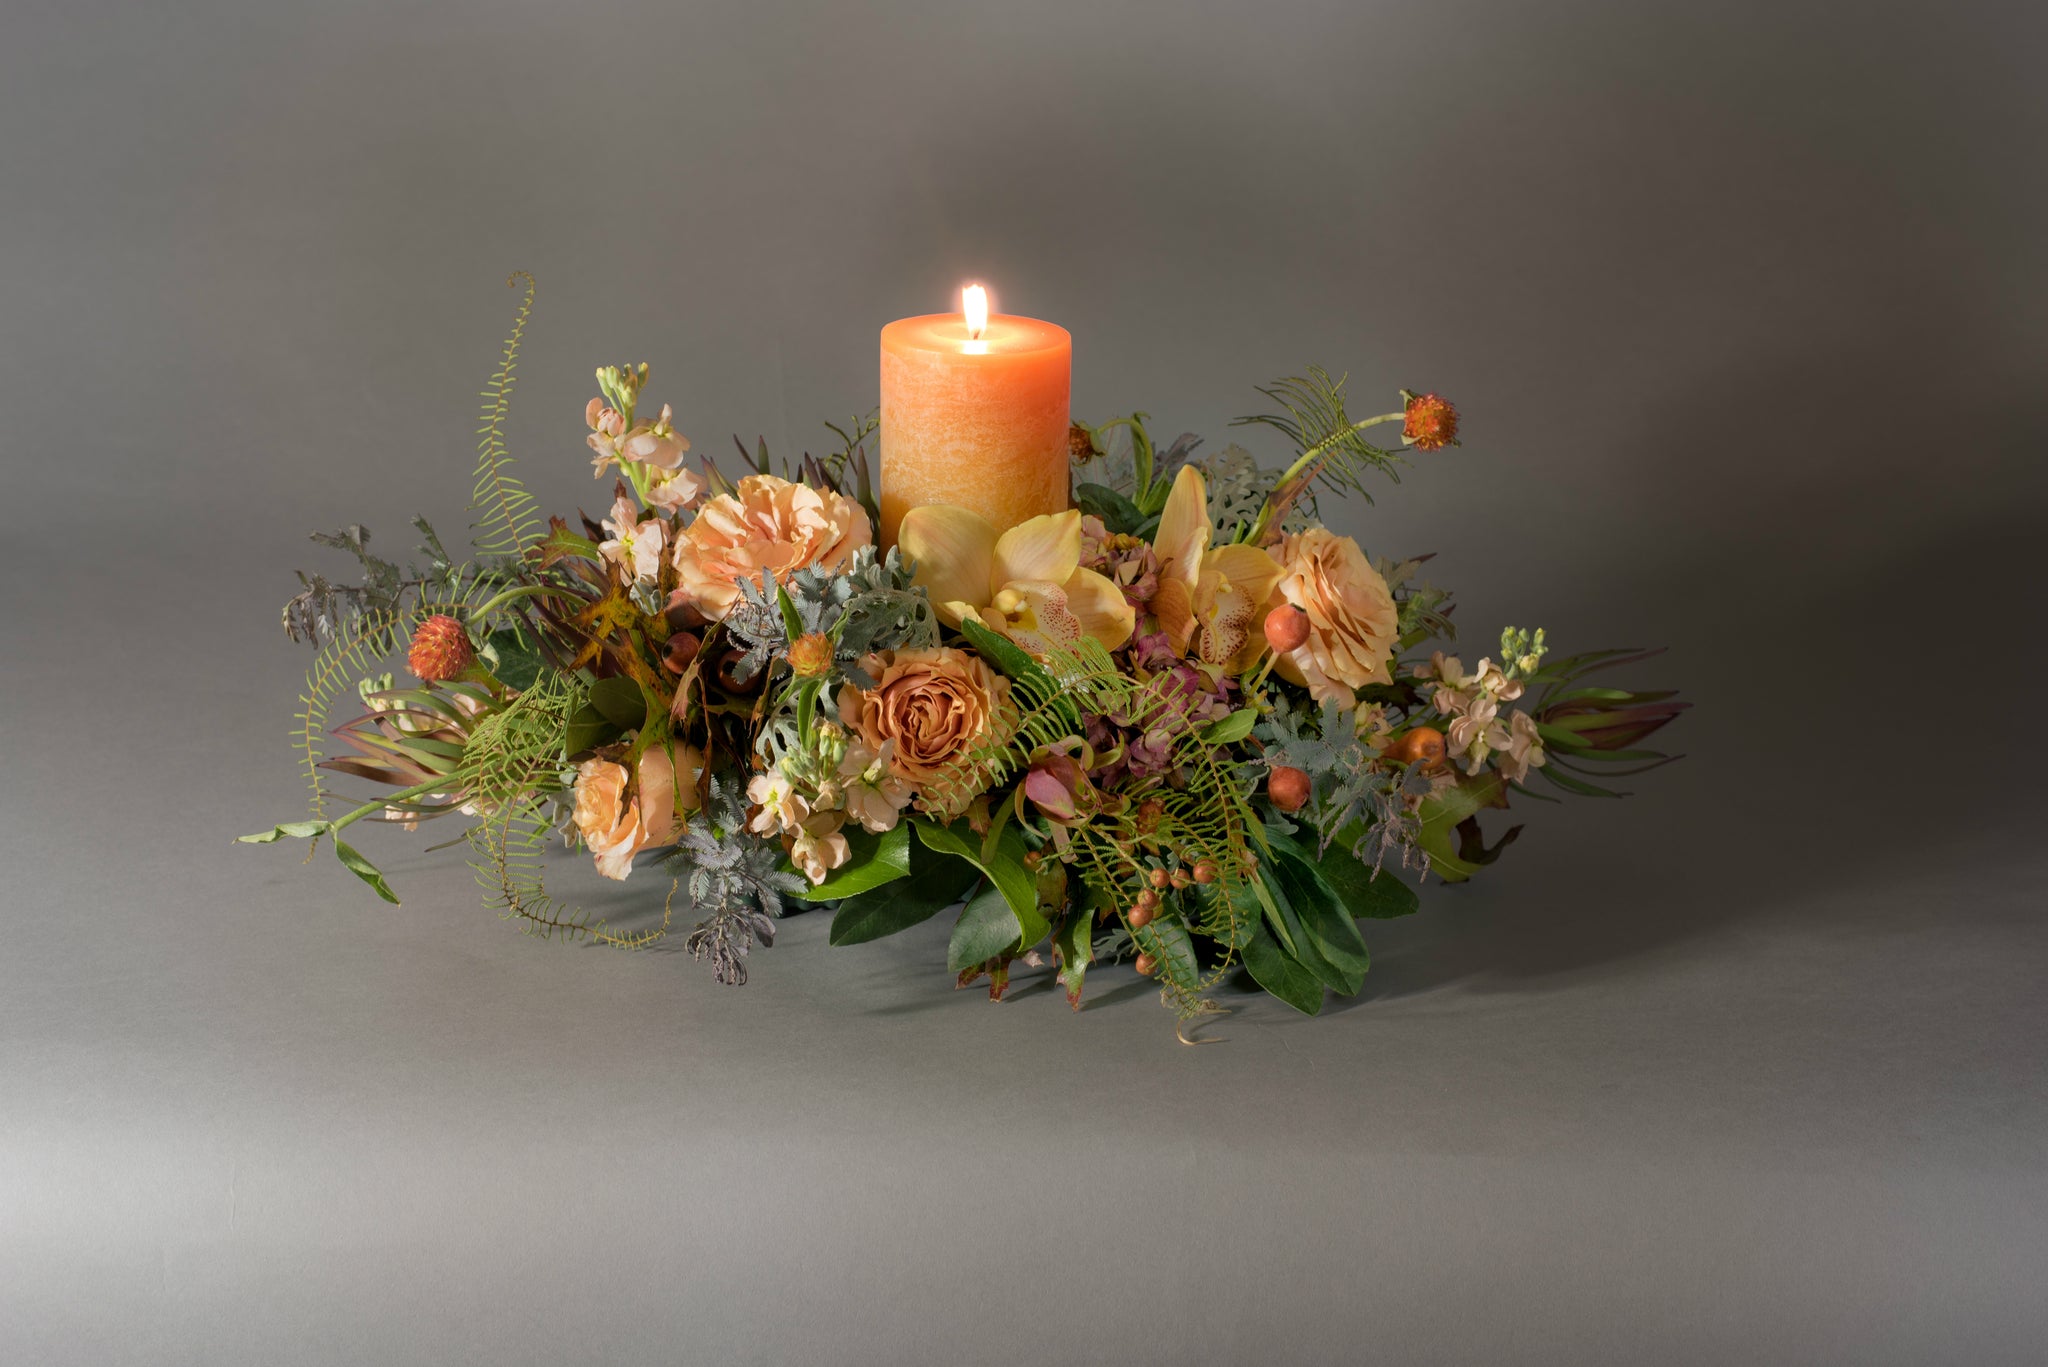 Low & lush centerpiece with timber candle